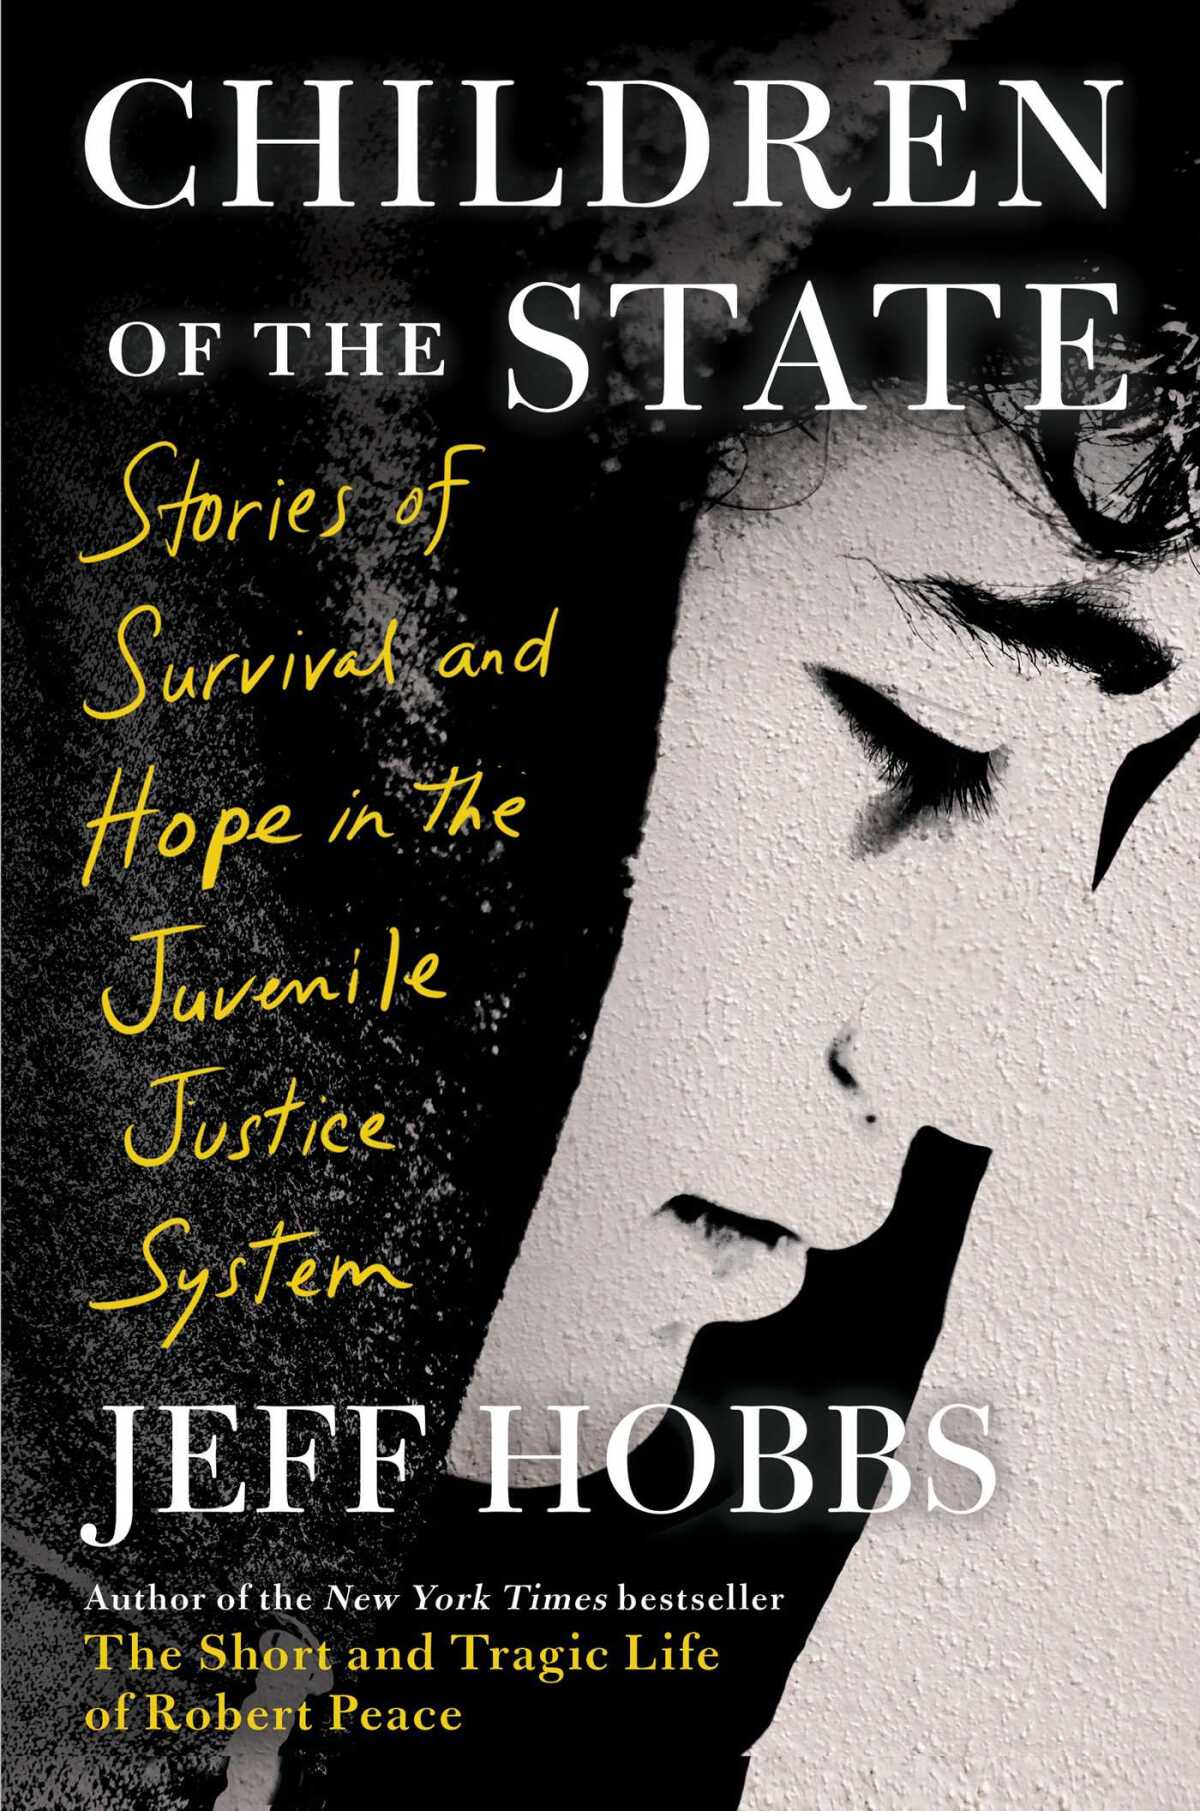 'Children of the State' book cover.